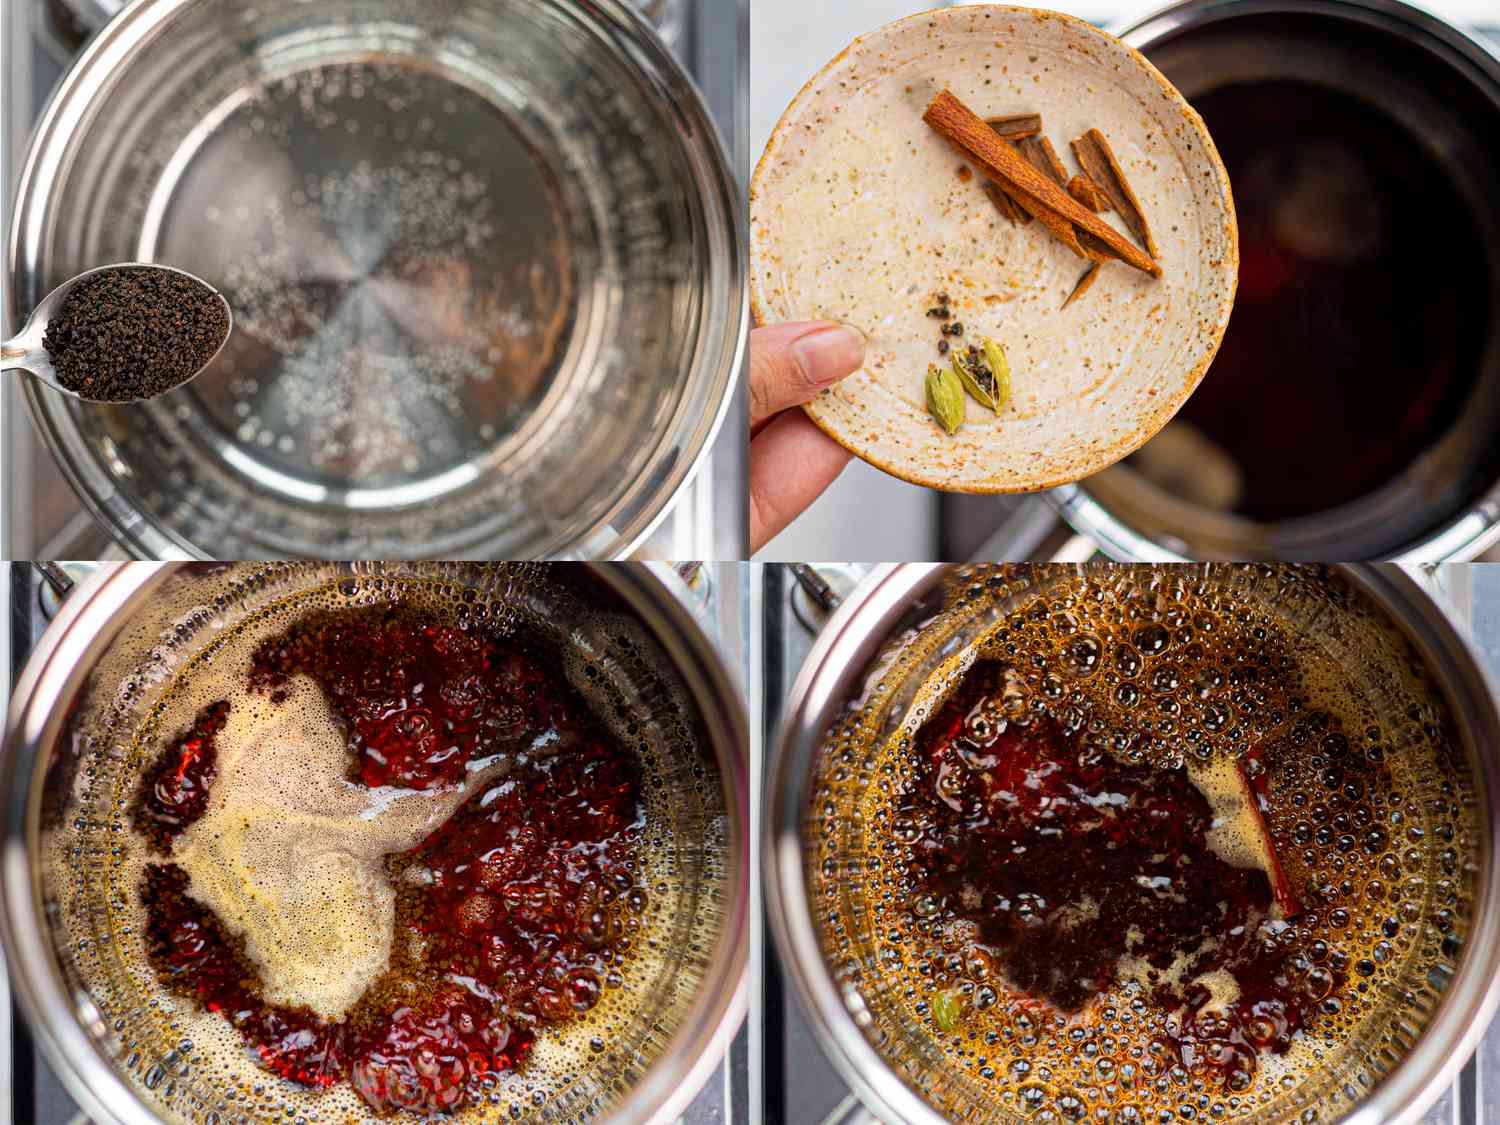 Four image collage of boiling tea